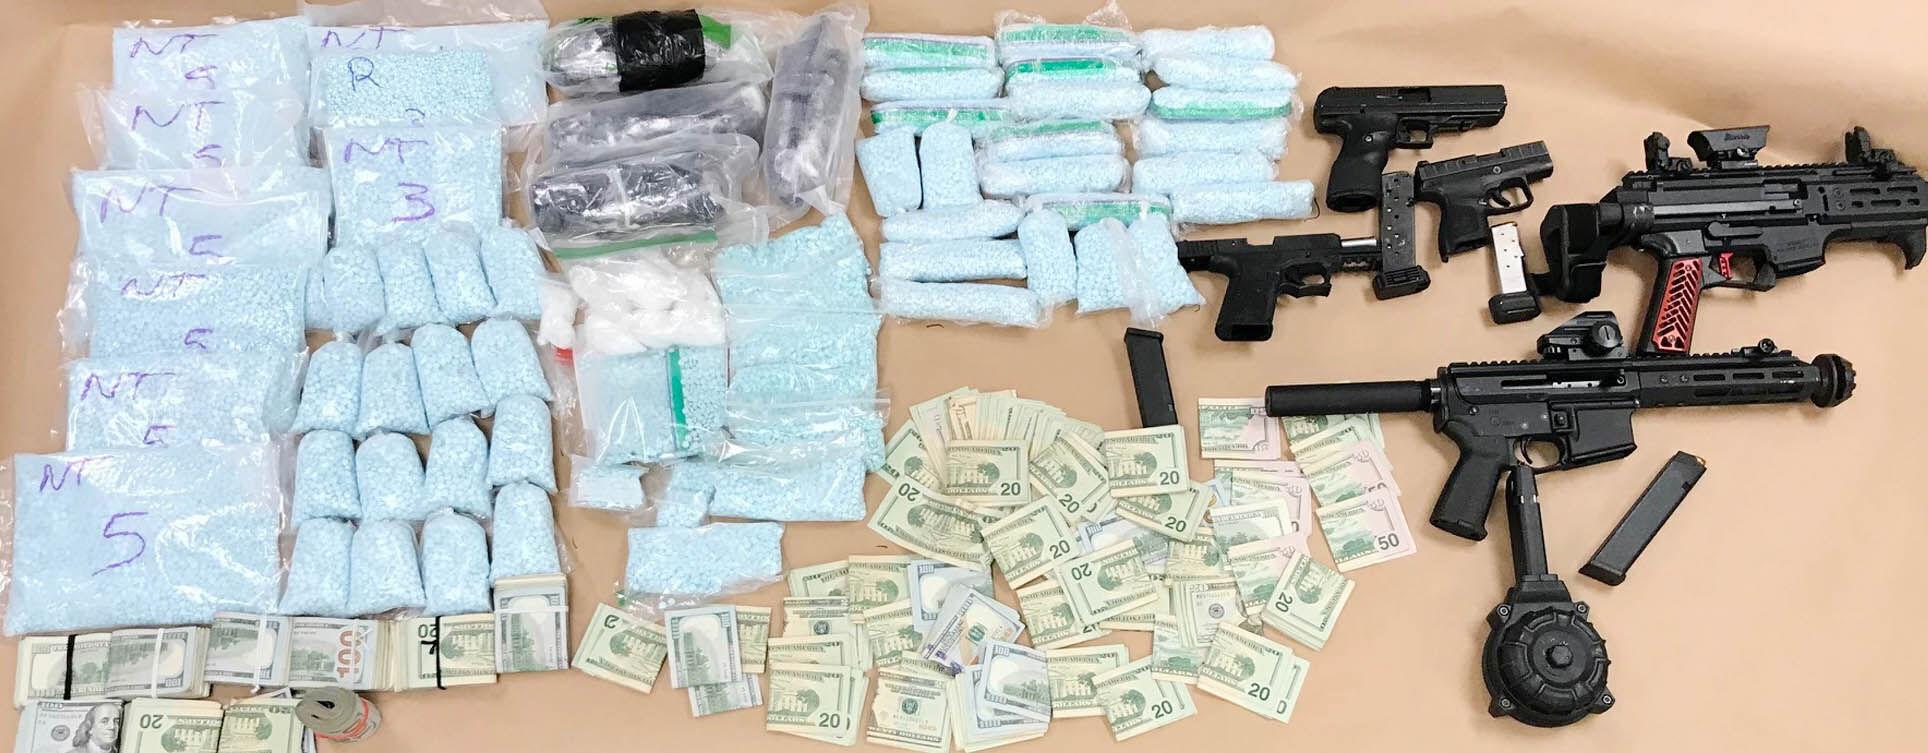 Law enforcement seized drugs, guns and cash in March 2022 in Mount Vernon, Washington.

